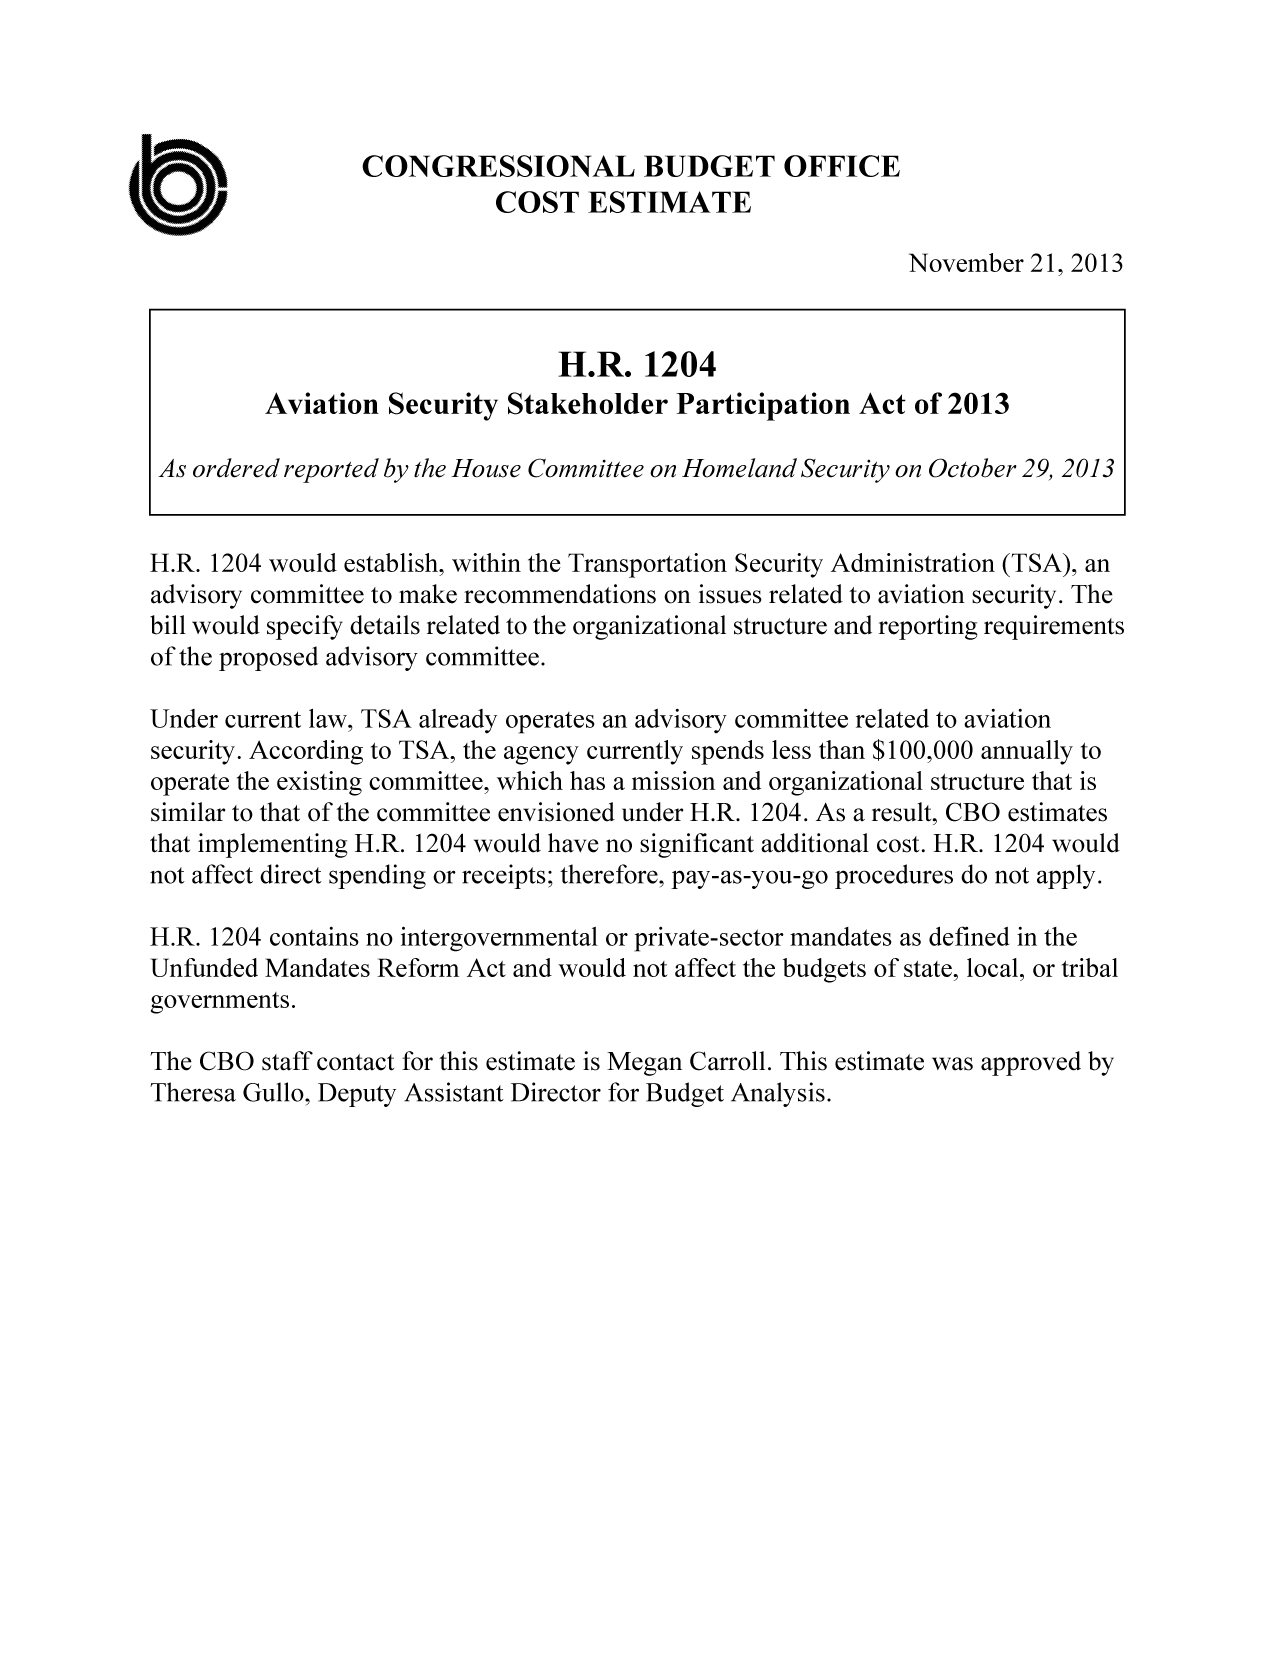 handle is hein.congrec/cbo11407 and id is 1 raw text is: CONGRESSIONAL BUDGET OFFICE
COST ESTIMATE
November 21, 2013
H.R. 1204
Aviation Security Stakeholder Participation Act of 2013
As ordered reported by the House Committee on Homeland Security on October 29, 2013
H.R. 1204 would establish, within the Transportation Security Administration (TSA), an
advisory committee to make recommendations on issues related to aviation security. The
bill would specify details related to the organizational structure and reporting requirements
of the proposed advisory committee.
Under current law, TSA already operates an advisory committee related to aviation
security. According to TSA, the agency currently spends less than $100,000 annually to
operate the existing committee, which has a mission and organizational structure that is
similar to that of the committee envisioned under H.R. 1204. As a result, CBO estimates
that implementing H.R. 1204 would have no significant additional cost. H.R. 1204 would
not affect direct spending or receipts; therefore, pay-as-you-go procedures do not apply.
H.R. 1204 contains no intergovernmental or private-sector mandates as defined in the
Unfunded Mandates Reform Act and would not affect the budgets of state, local, or tribal
governments.
The CBO staff contact for this estimate is Megan Carroll. This estimate was approved by
Theresa Gullo, Deputy Assistant Director for Budget Analysis.


